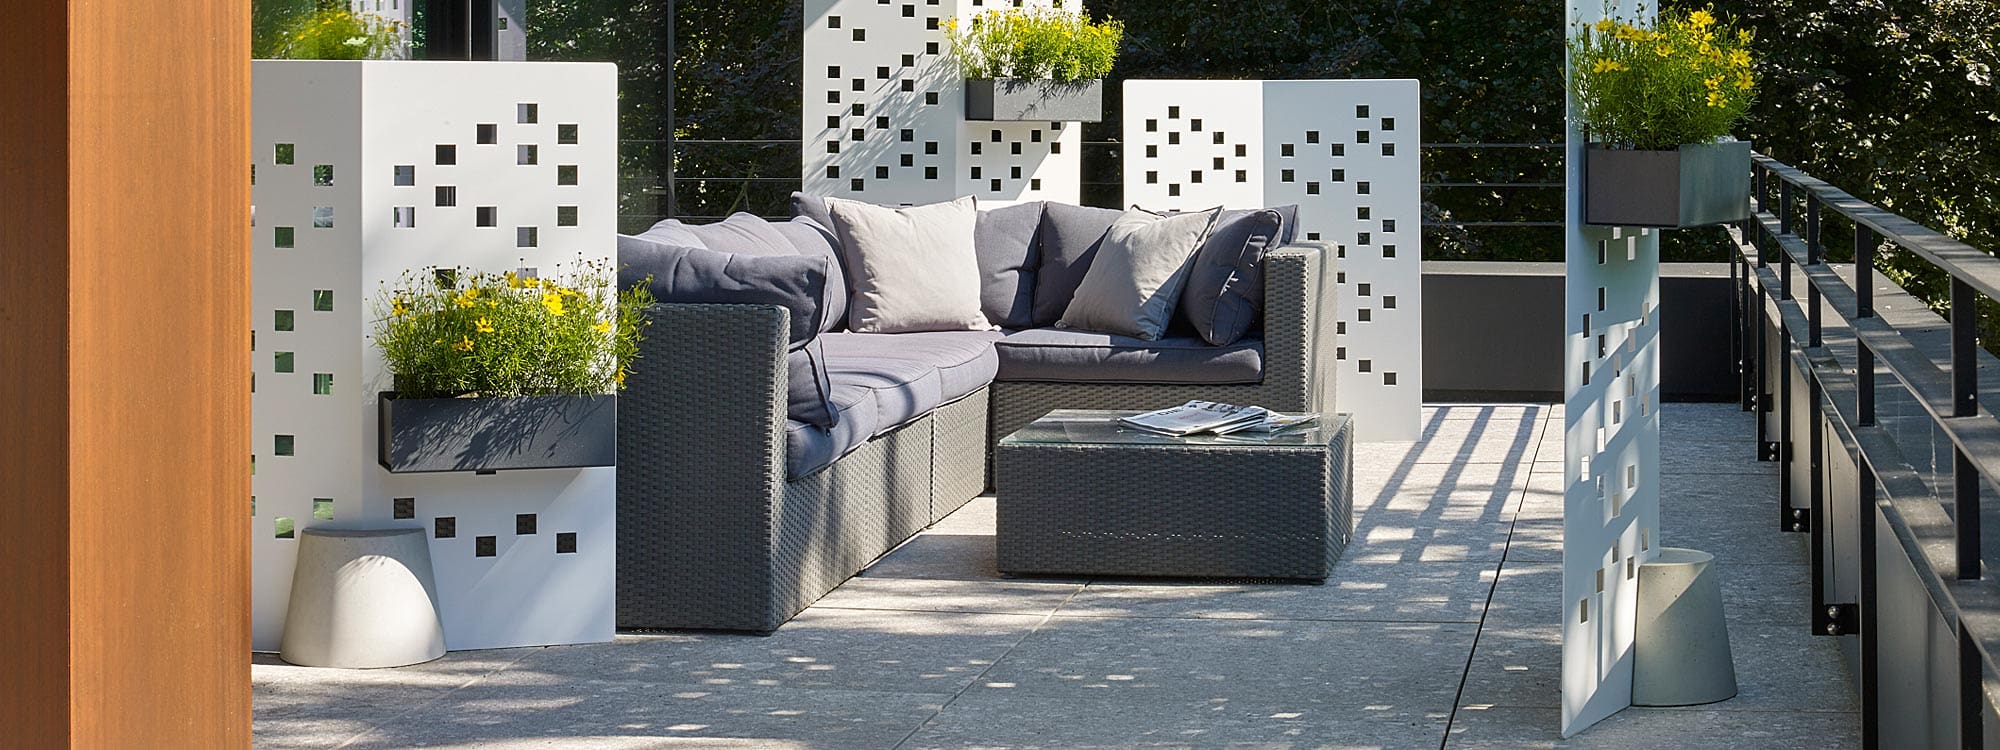 Image of Separo Solo free-standing white garden screens by Flora, shown in different sizes around a garden sofa